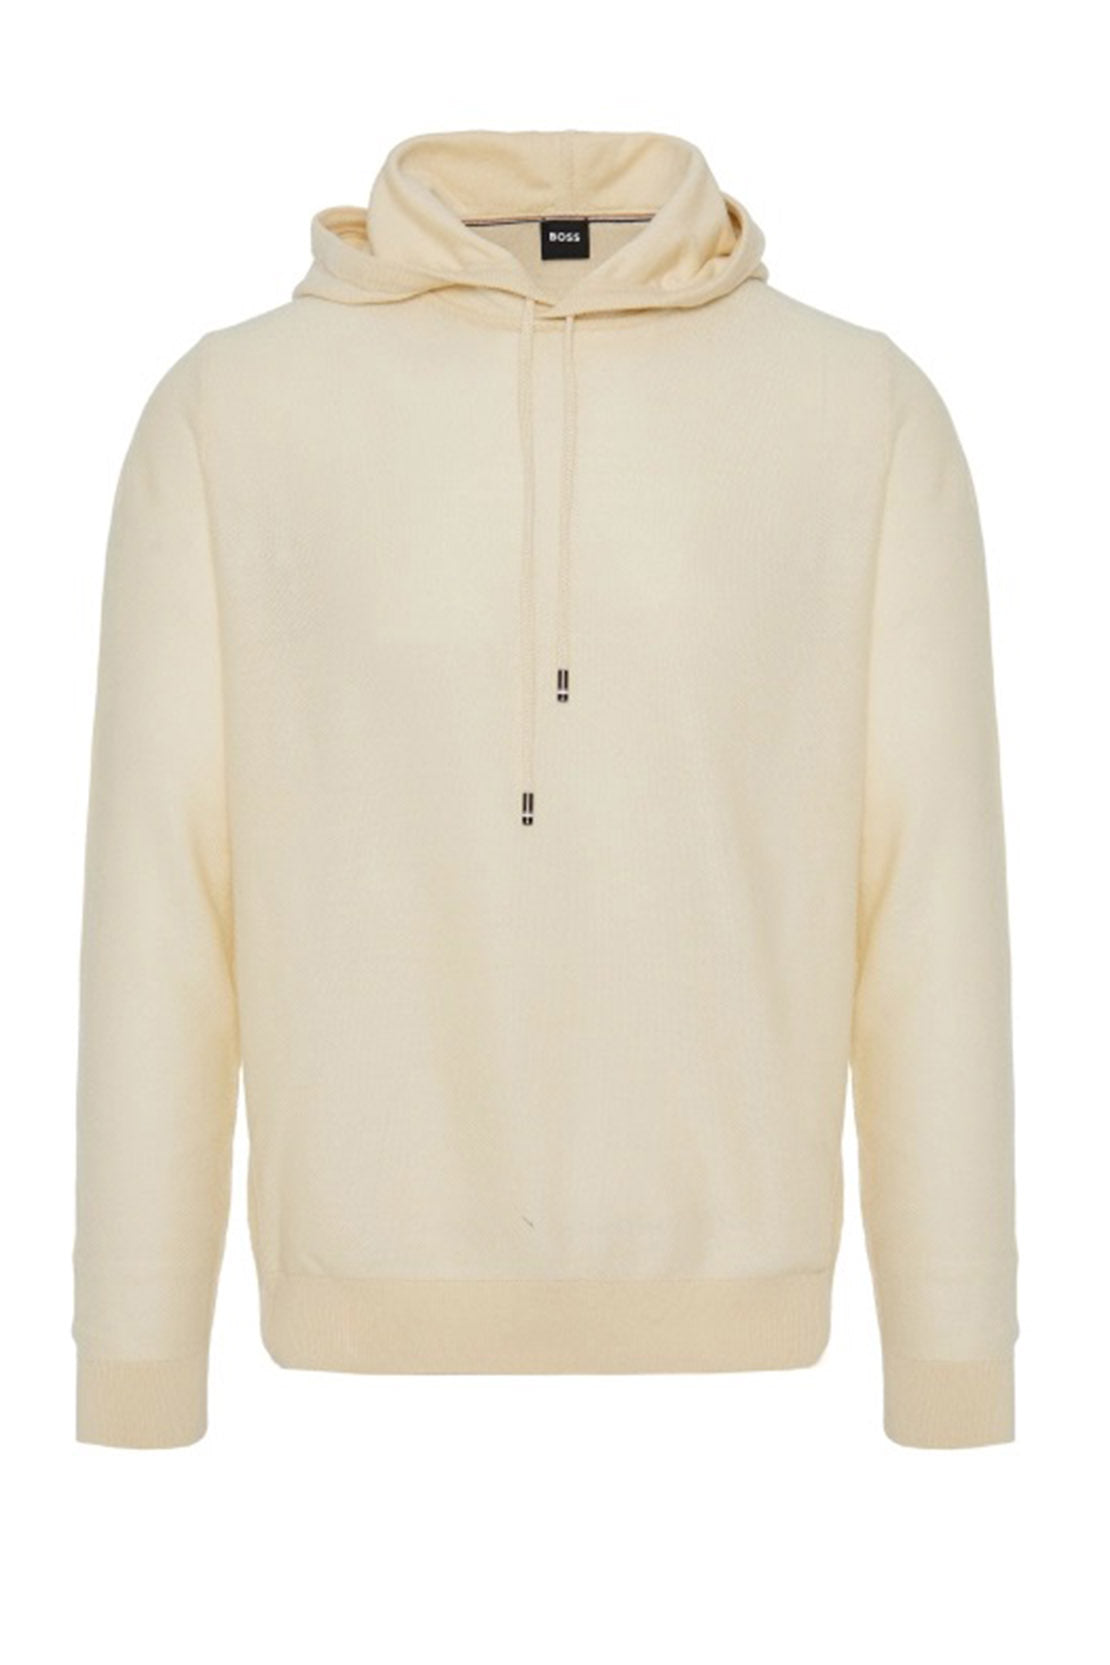 BOSS - TRAPANI Knitted Cotton Blend Hoodie In Open White 50511771 131